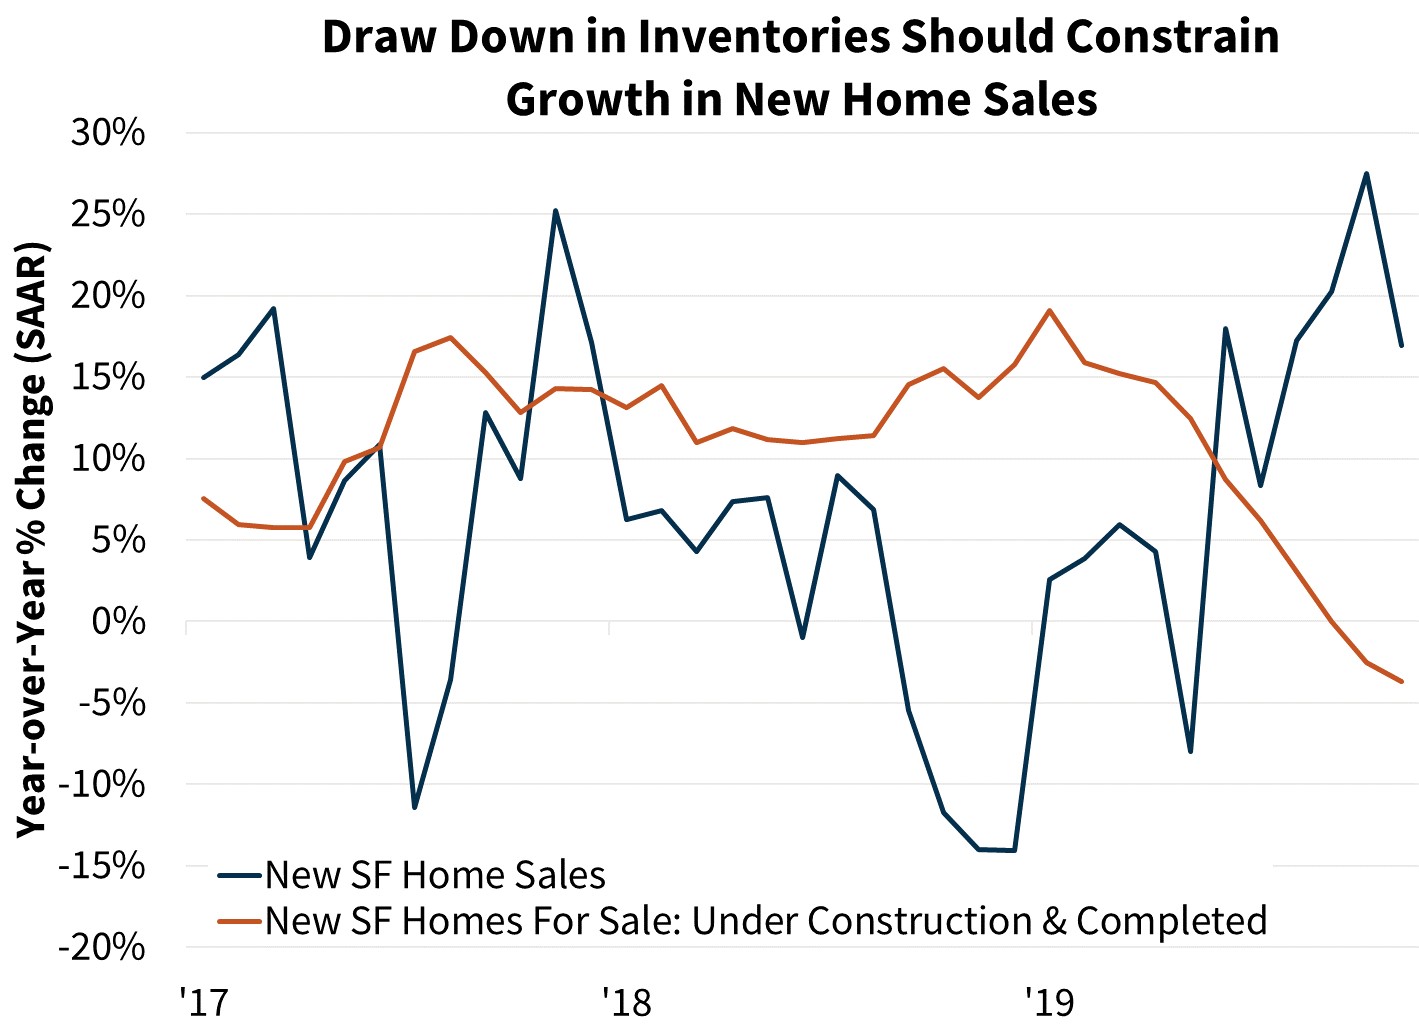 Draw Down in Inventories Should Constrain Growth in New Home Sales